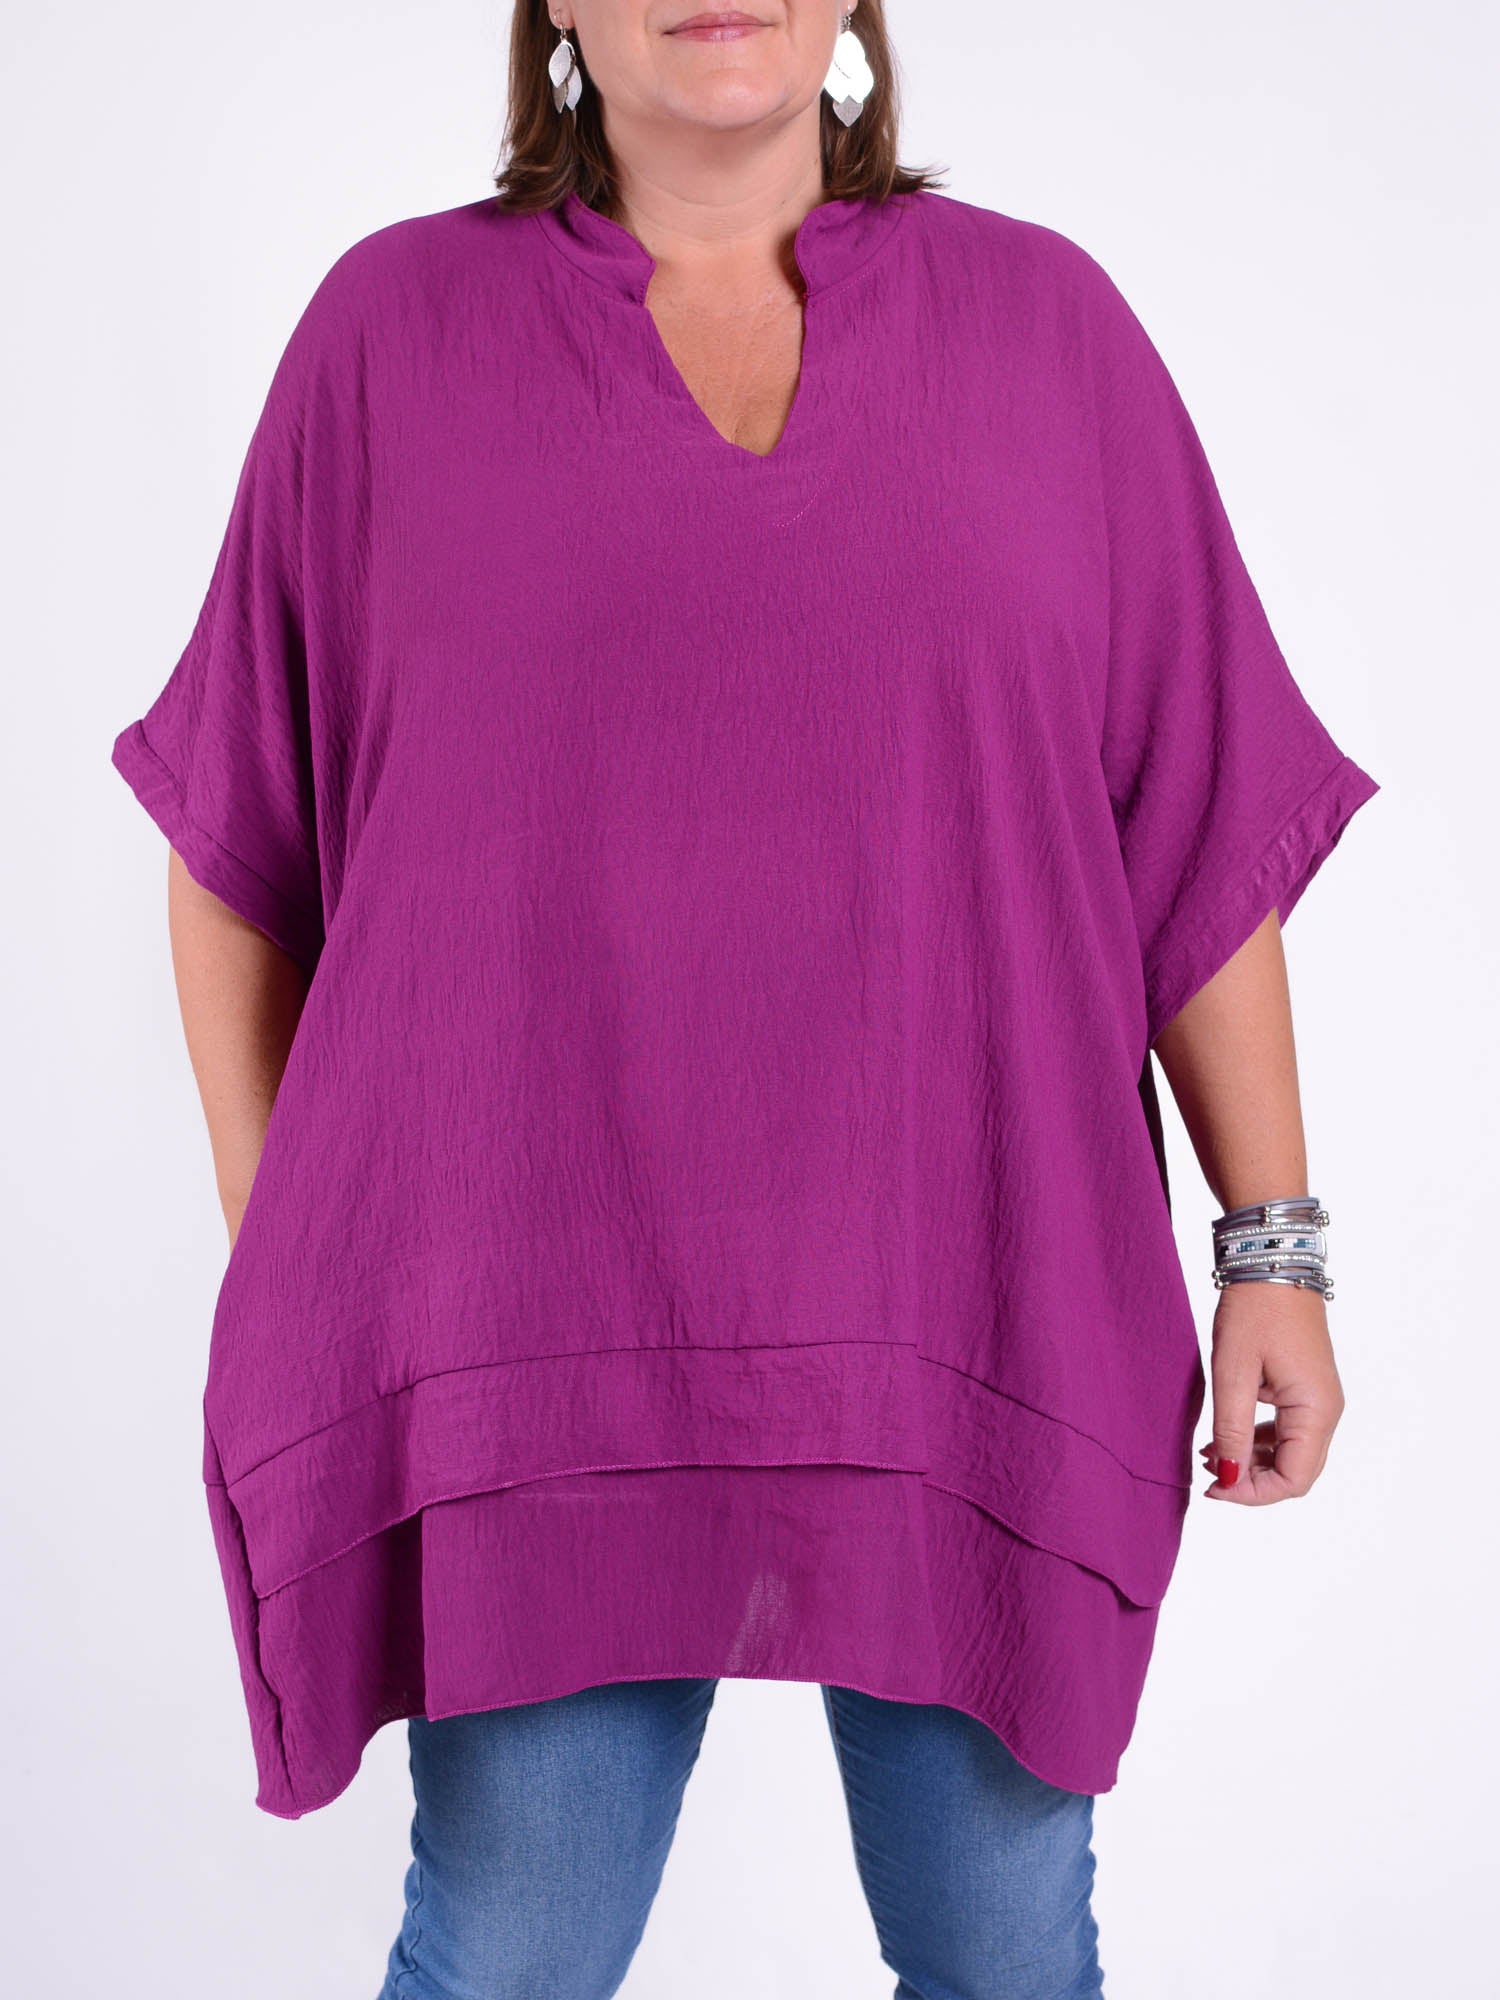 Oversized Lagenlook Tunic with pockets - TP1005, Tunic, Pure Plus Clothing, Lagenlook Clothing, Plus Size Fashion, Over 50 Fashion